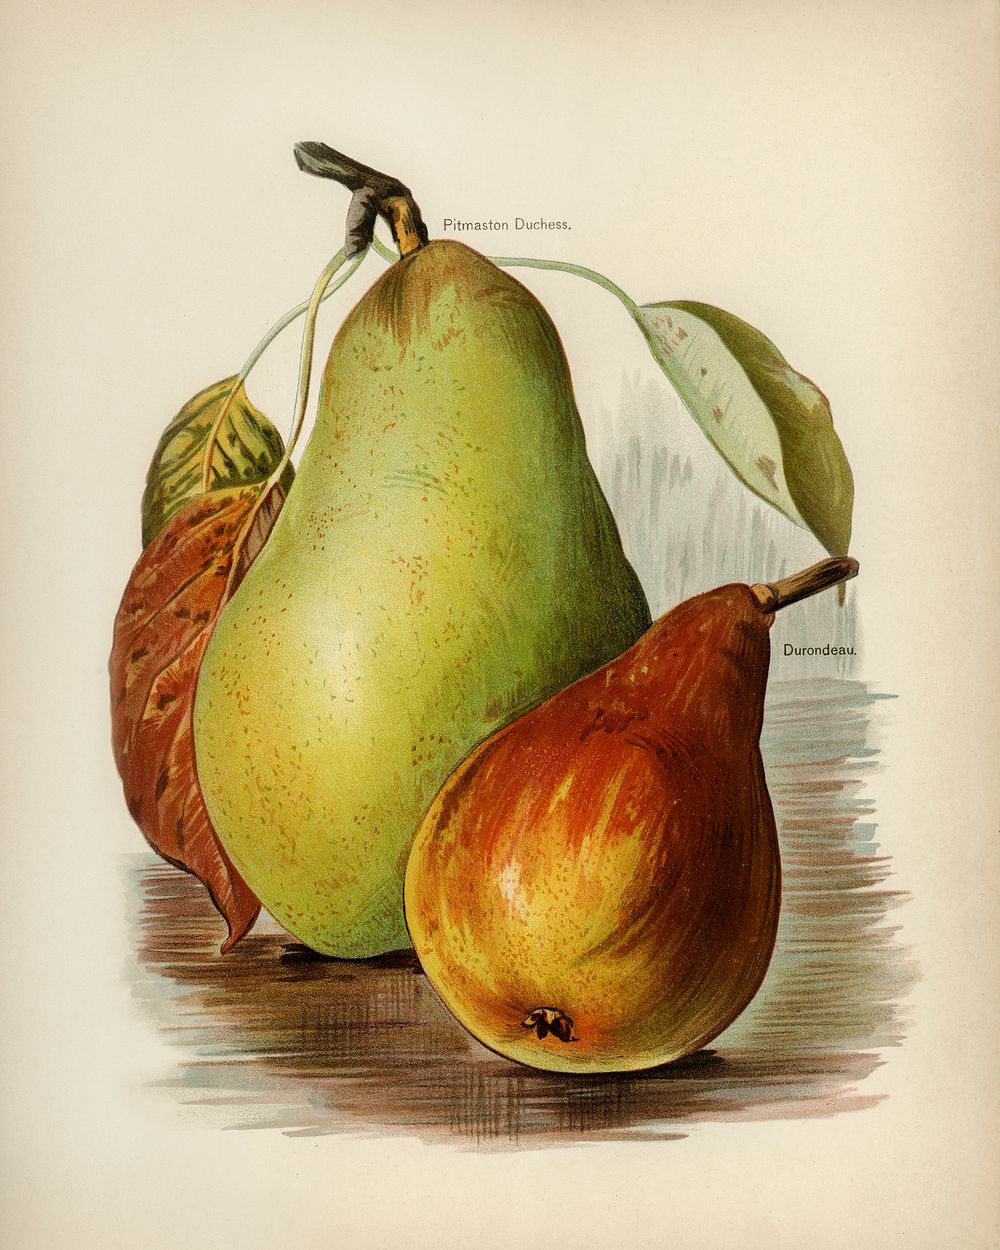 Vintage illustration of pear digitally enhanced from our own vintage edition of The Fruit Grower's Guide (1891) by John…